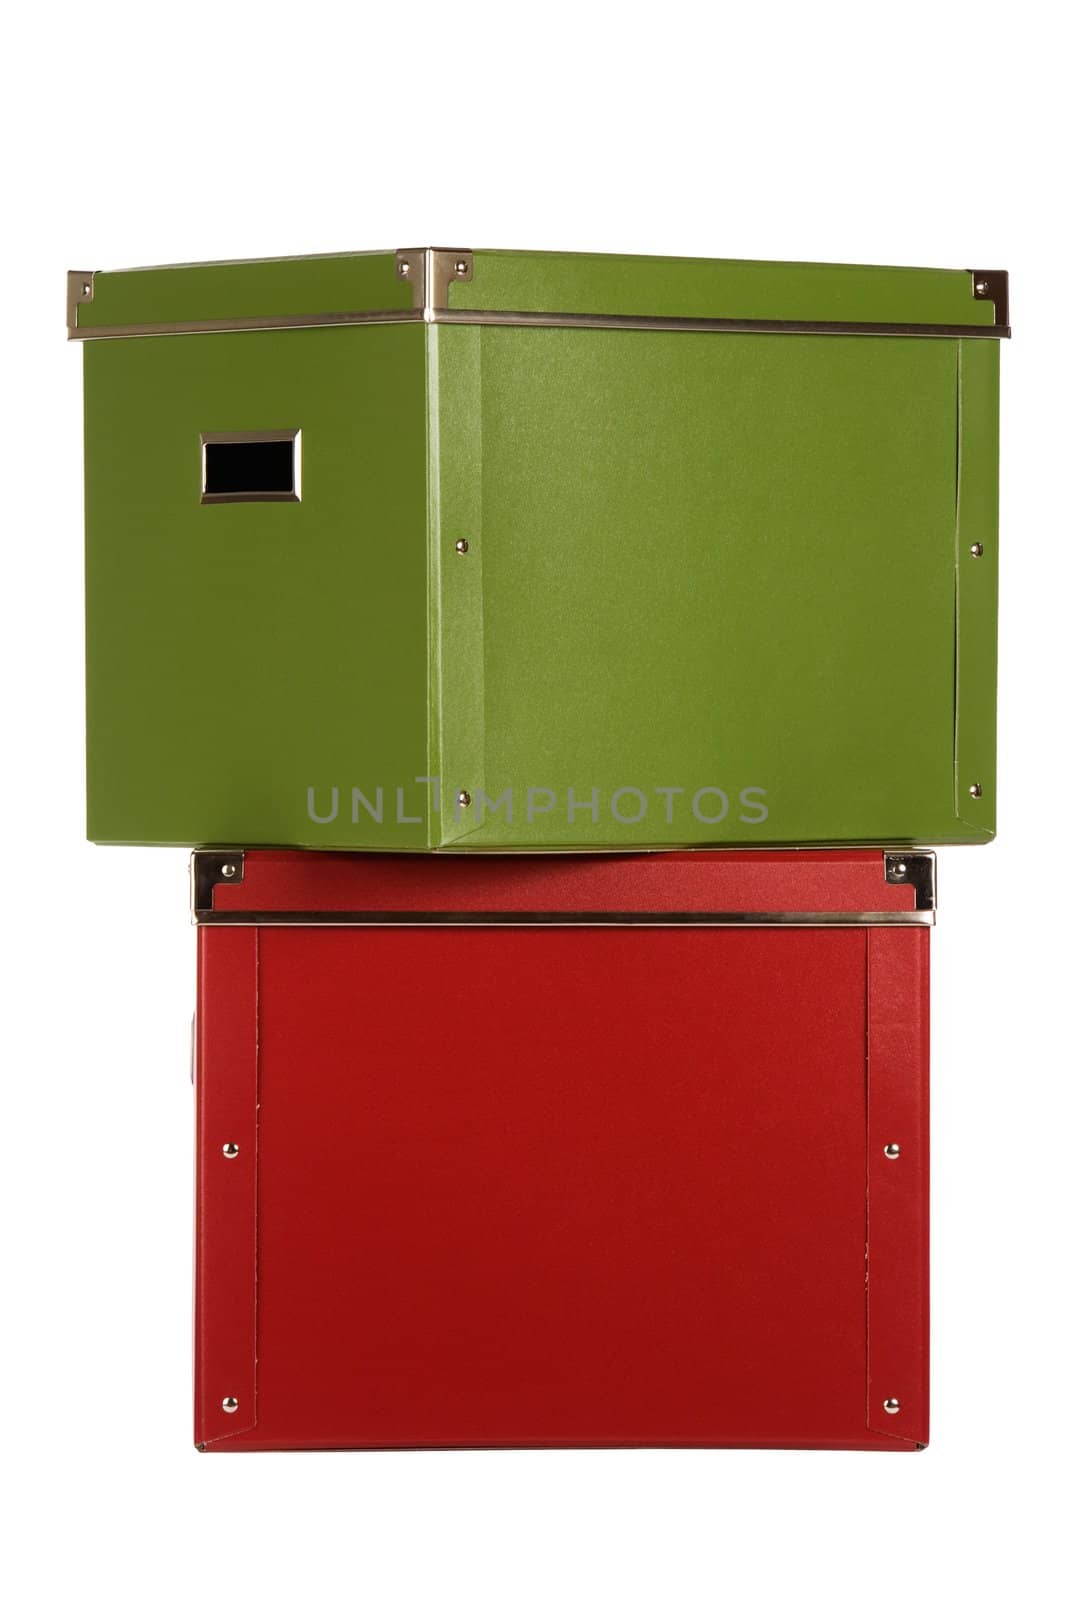 Green box and red box by Gravicapa